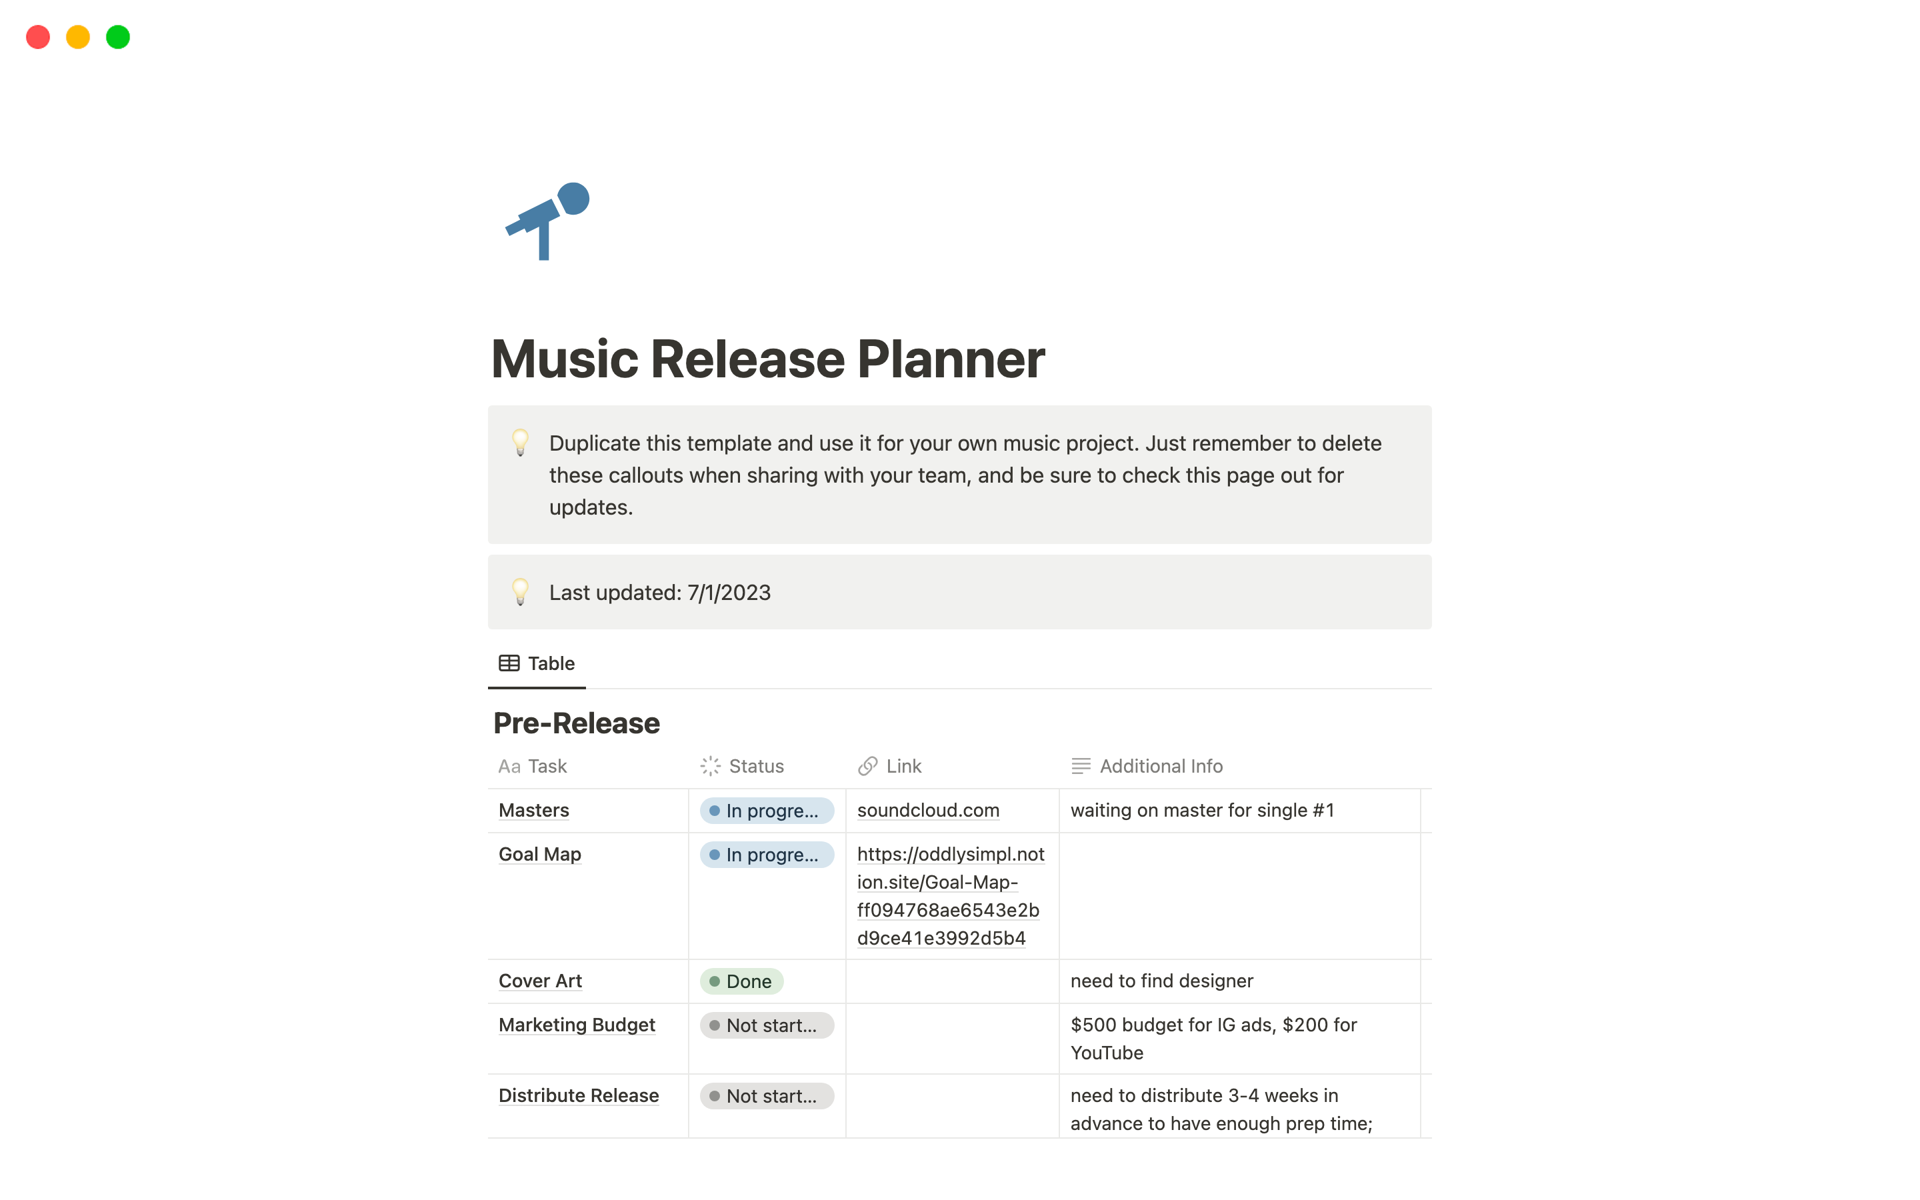 Our template is a comprehensive guide to everything you need to do to release your music successfully